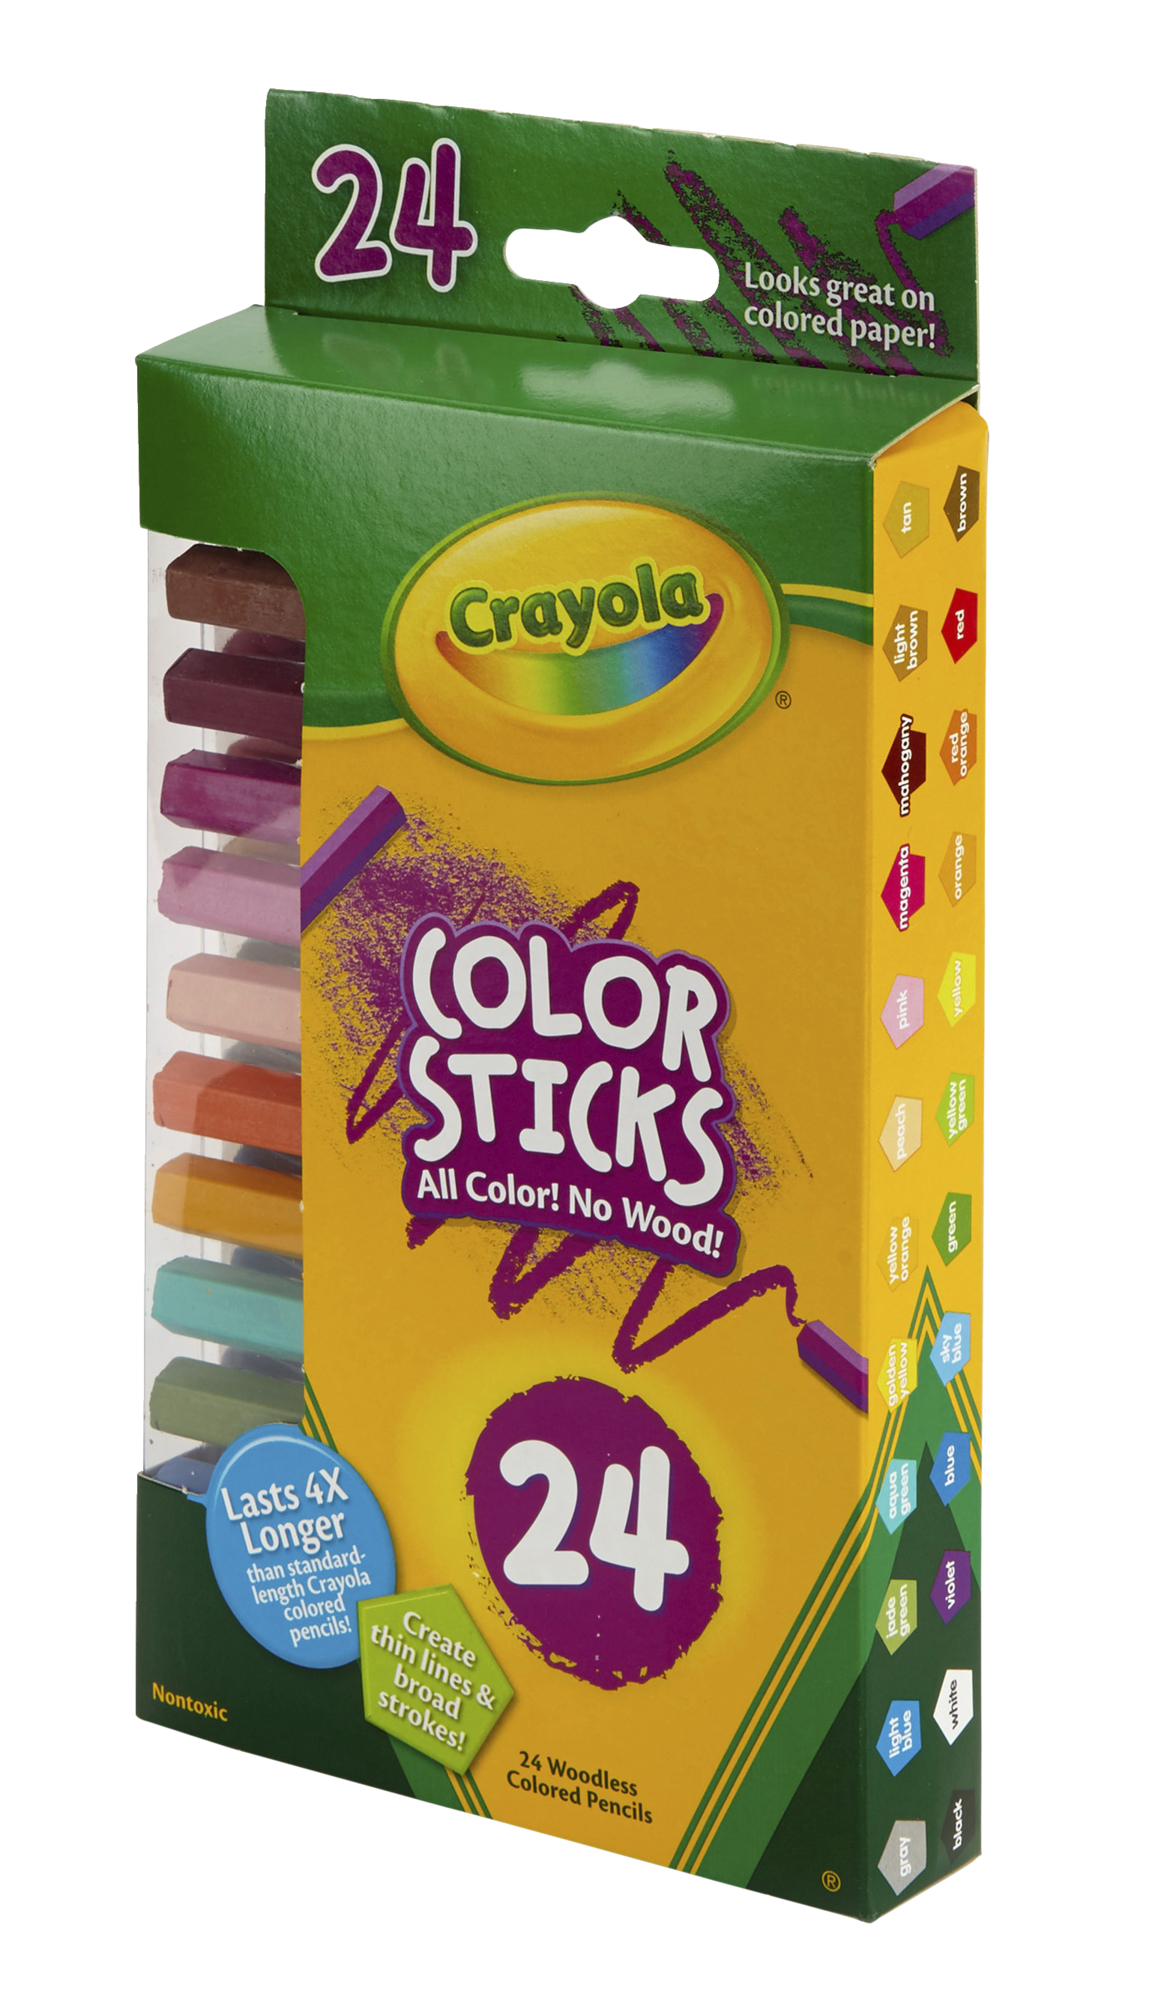 Crayola Color Sticks Woodless Pentagon Colored Pencils, Assorted Colors, Set of 24 - image 3 of 4